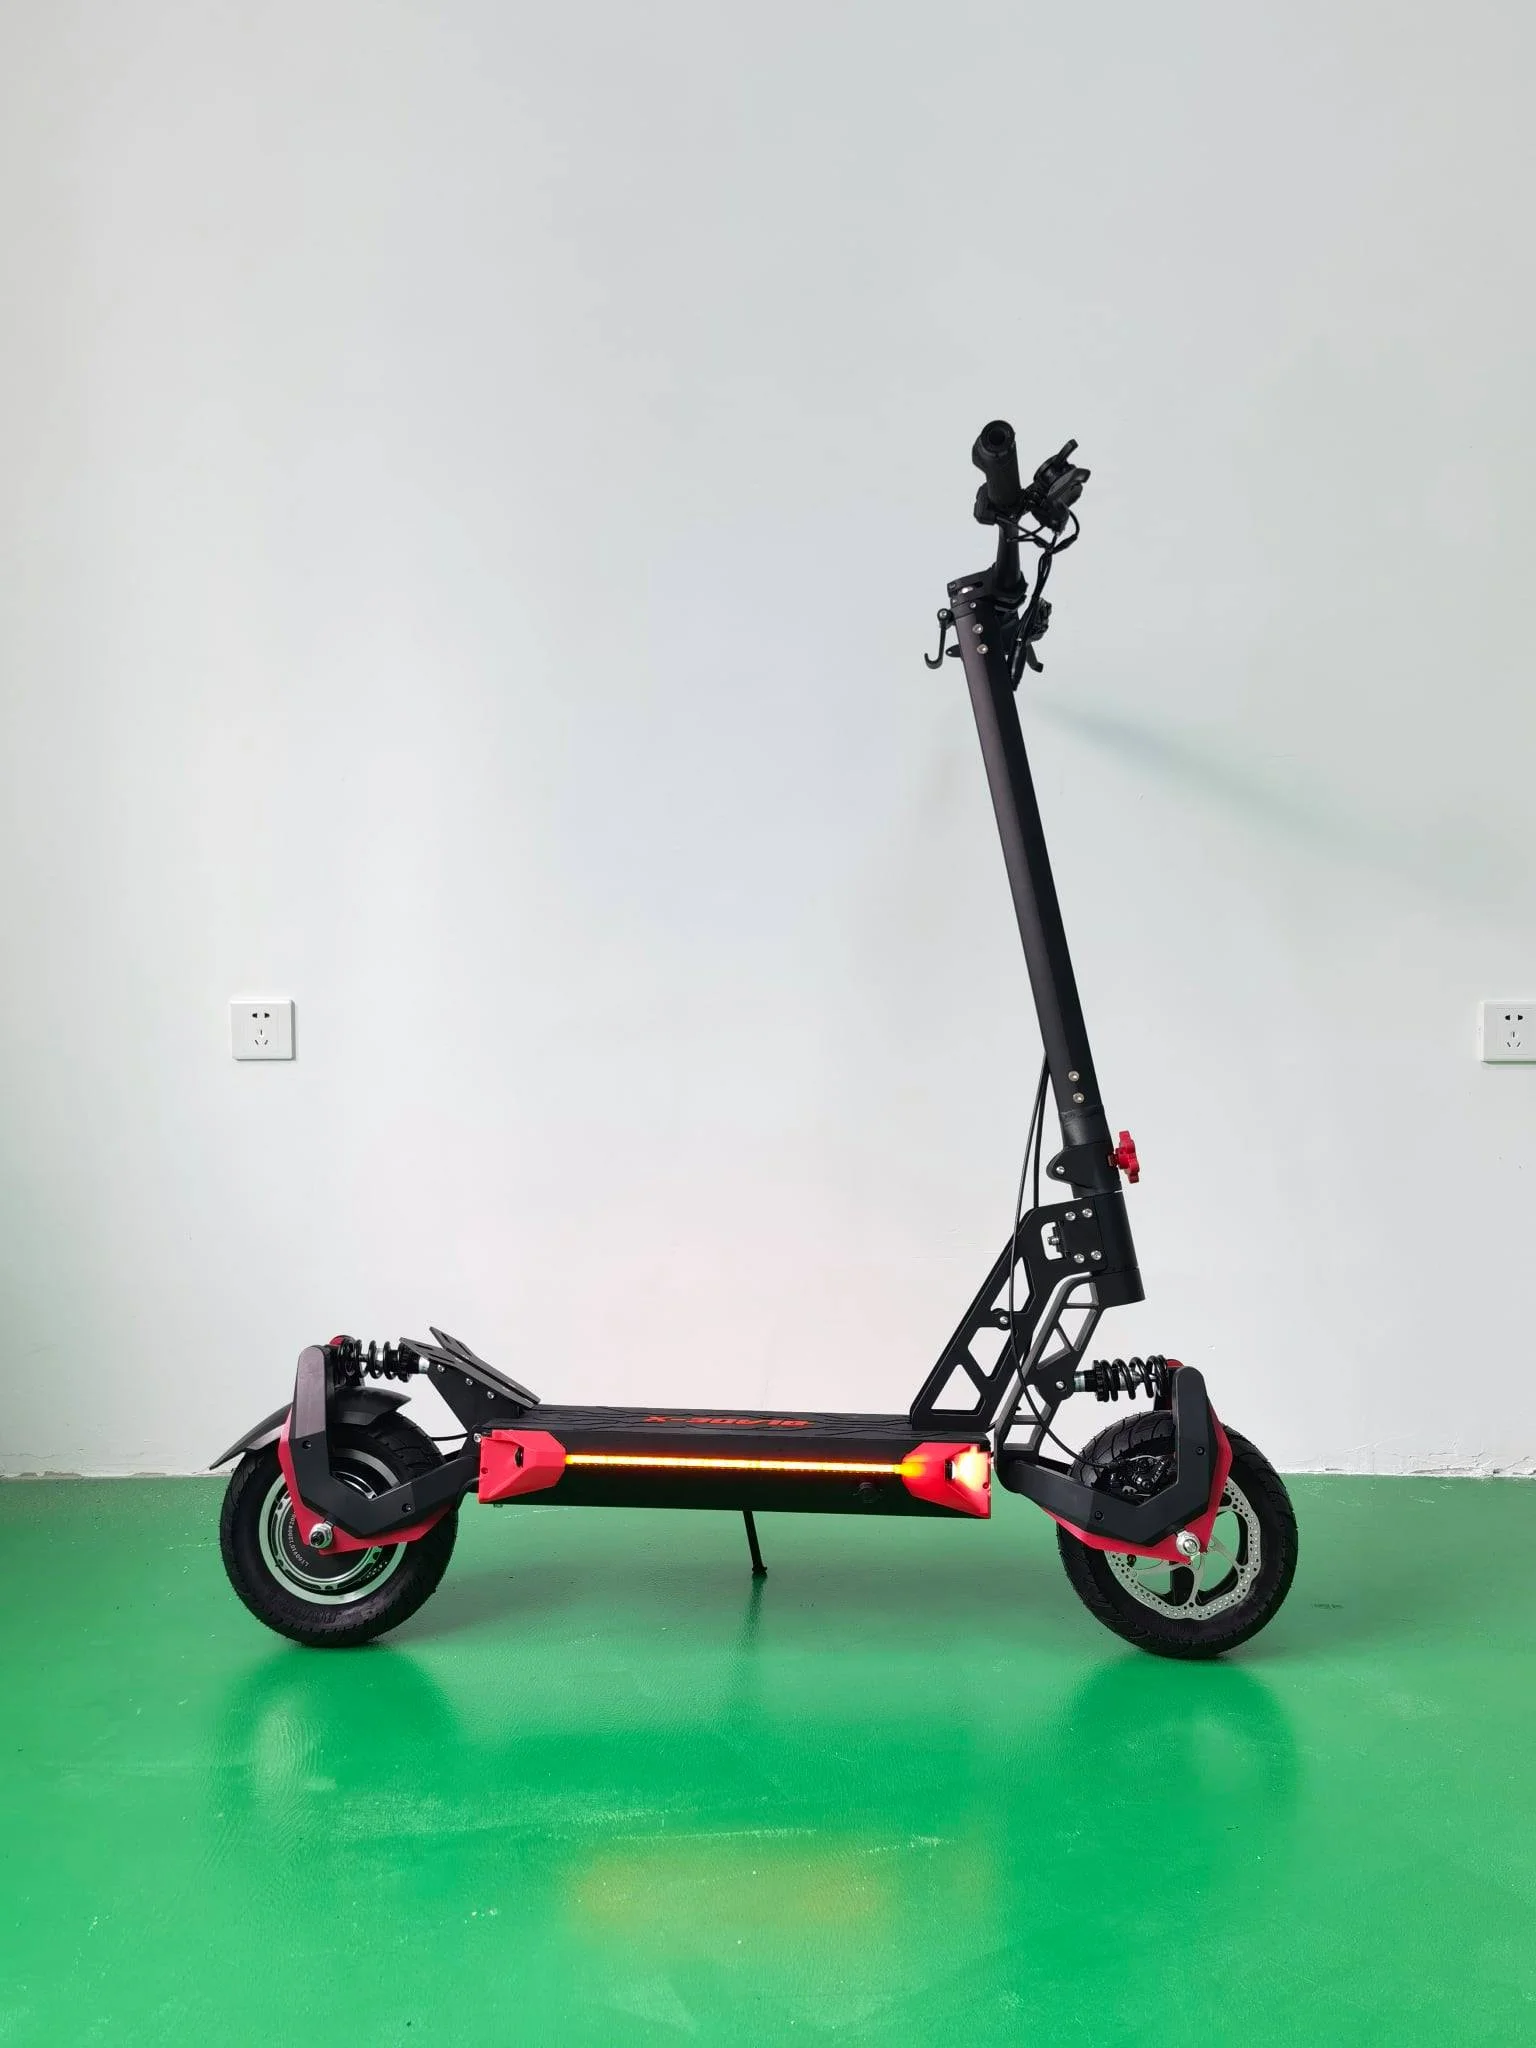 Blade X Pro - 2400w Electric Scooter - Freed Electric Scooters